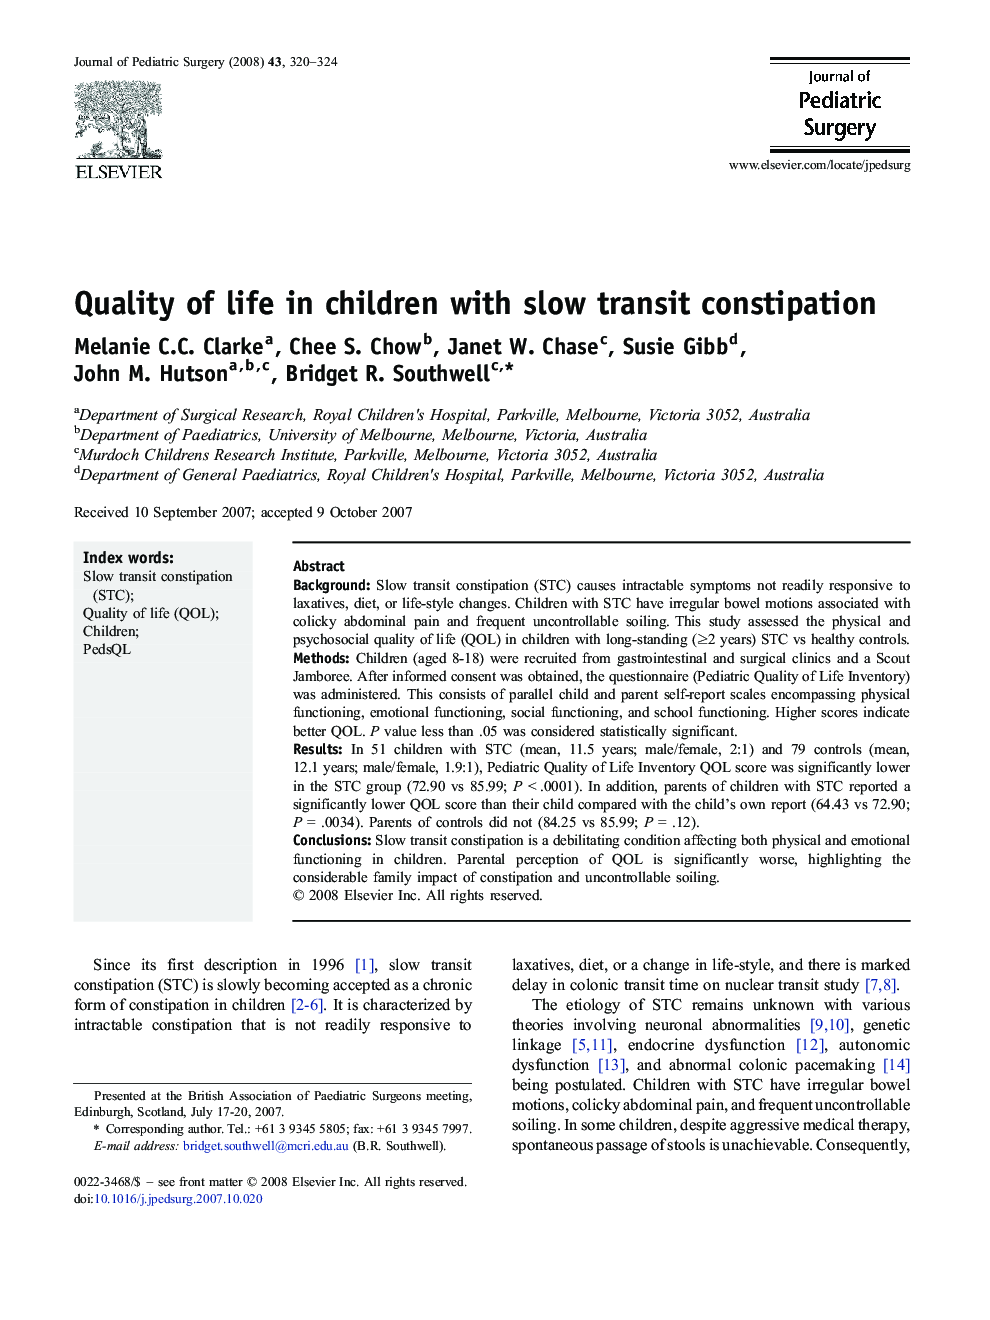 Quality of life in children with slow transit constipation 